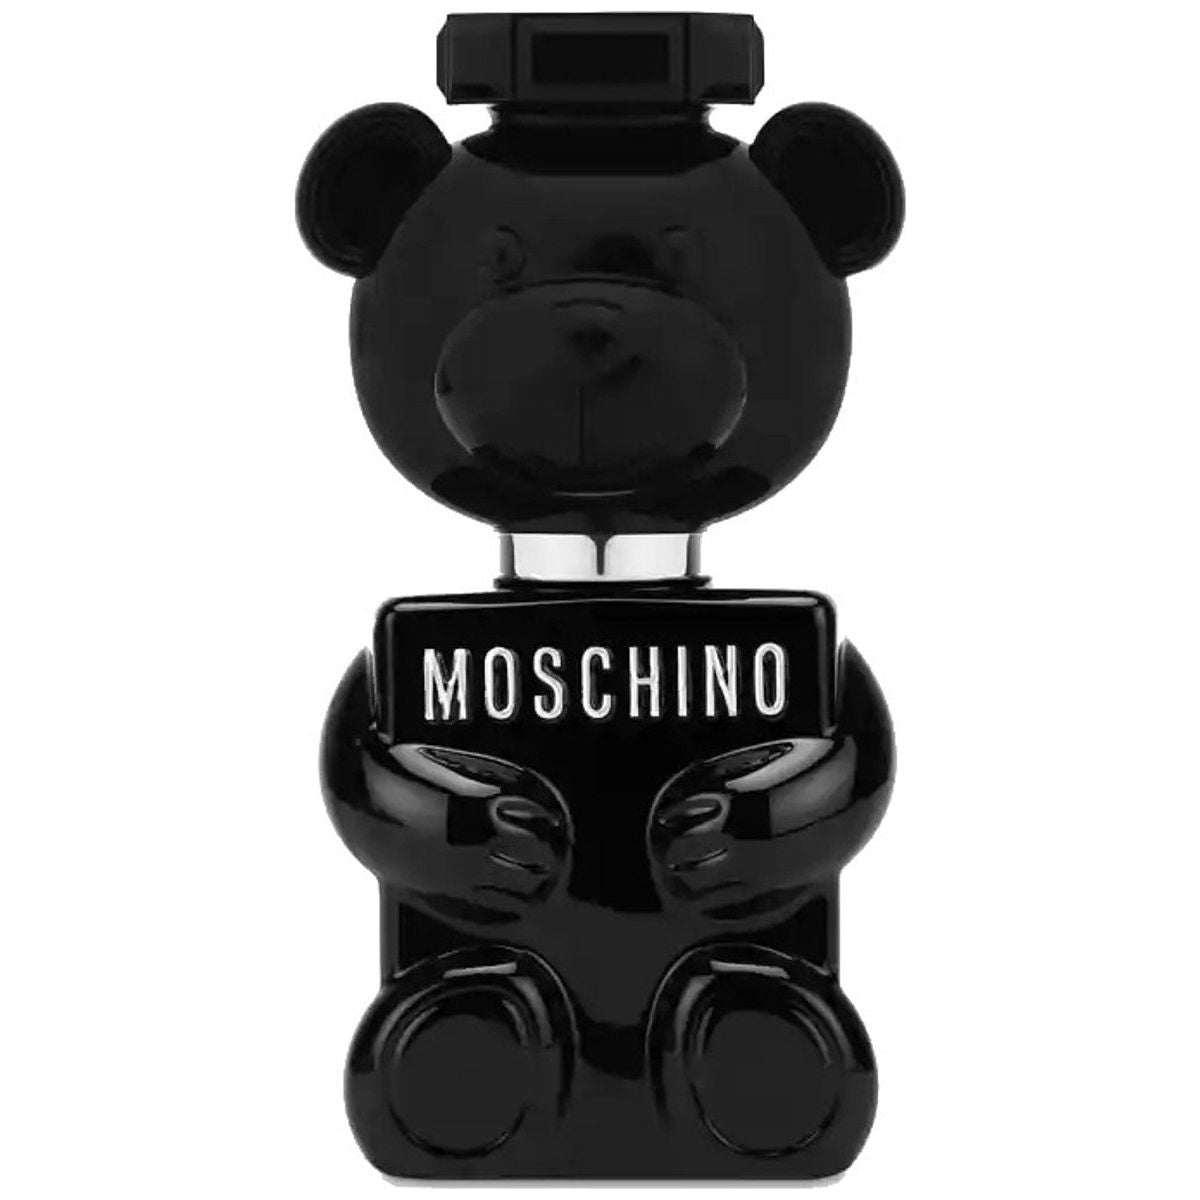 Moschino Toy Boy by Moschino cologne EDP 3.3 / 3.4 oz New Tester